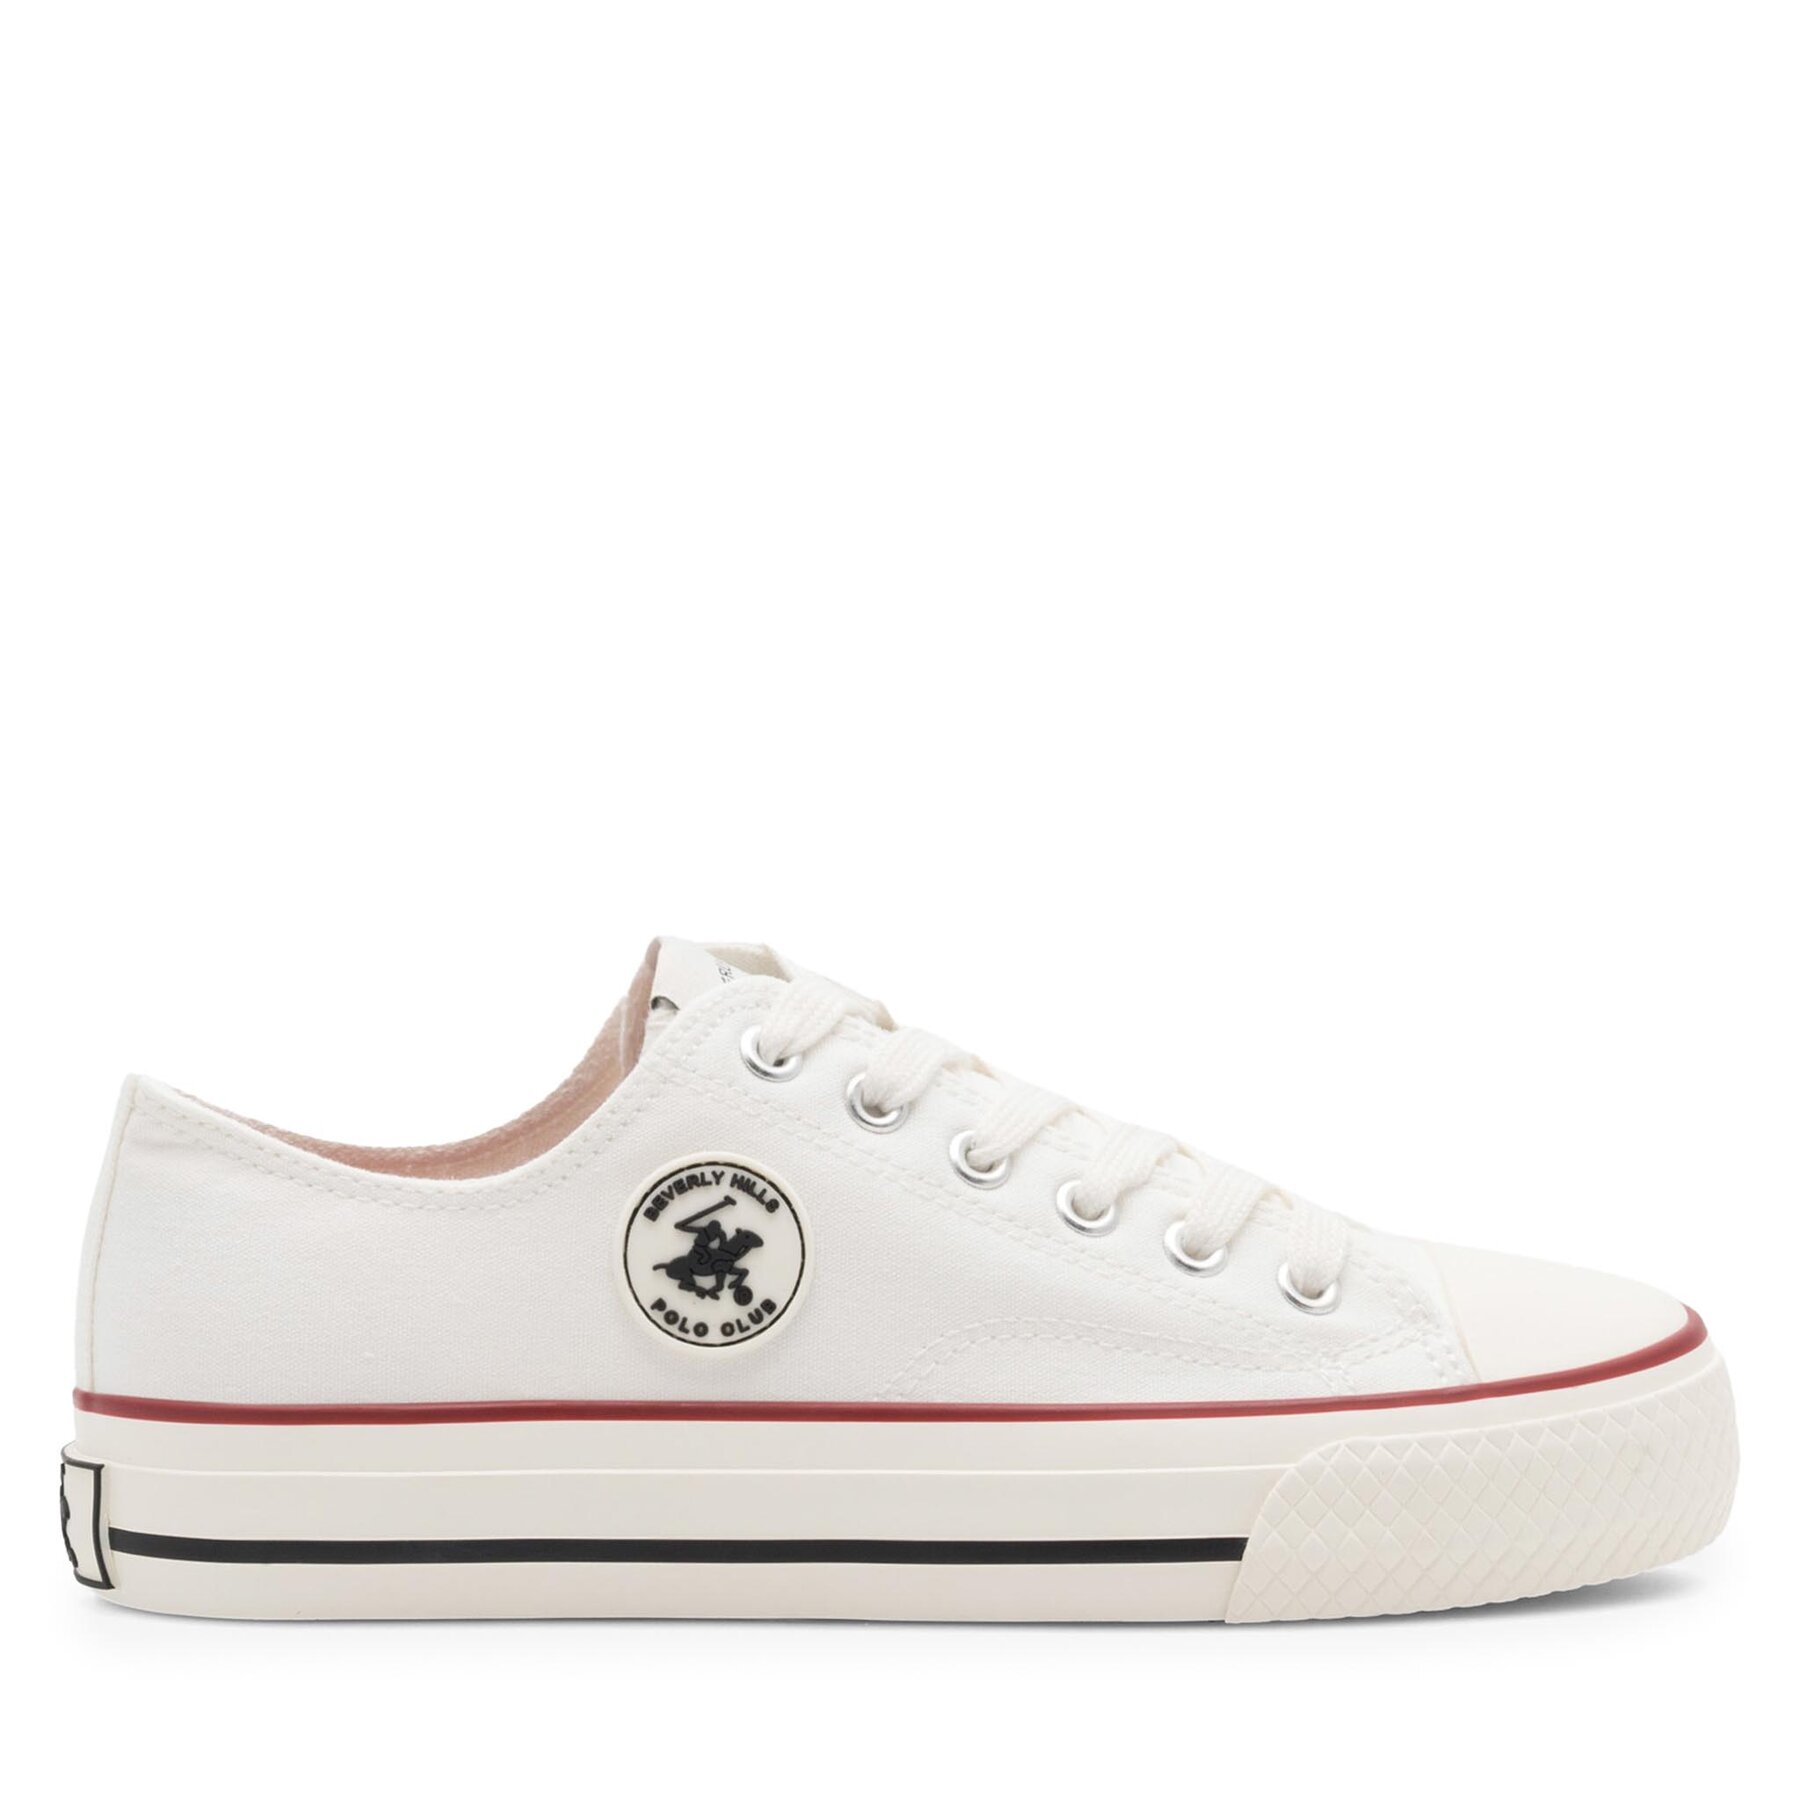 Sneakers aus Stoff Beverly Hills Polo Club WP40-OG-31-1 Weiß von Beverly Hills Polo Club